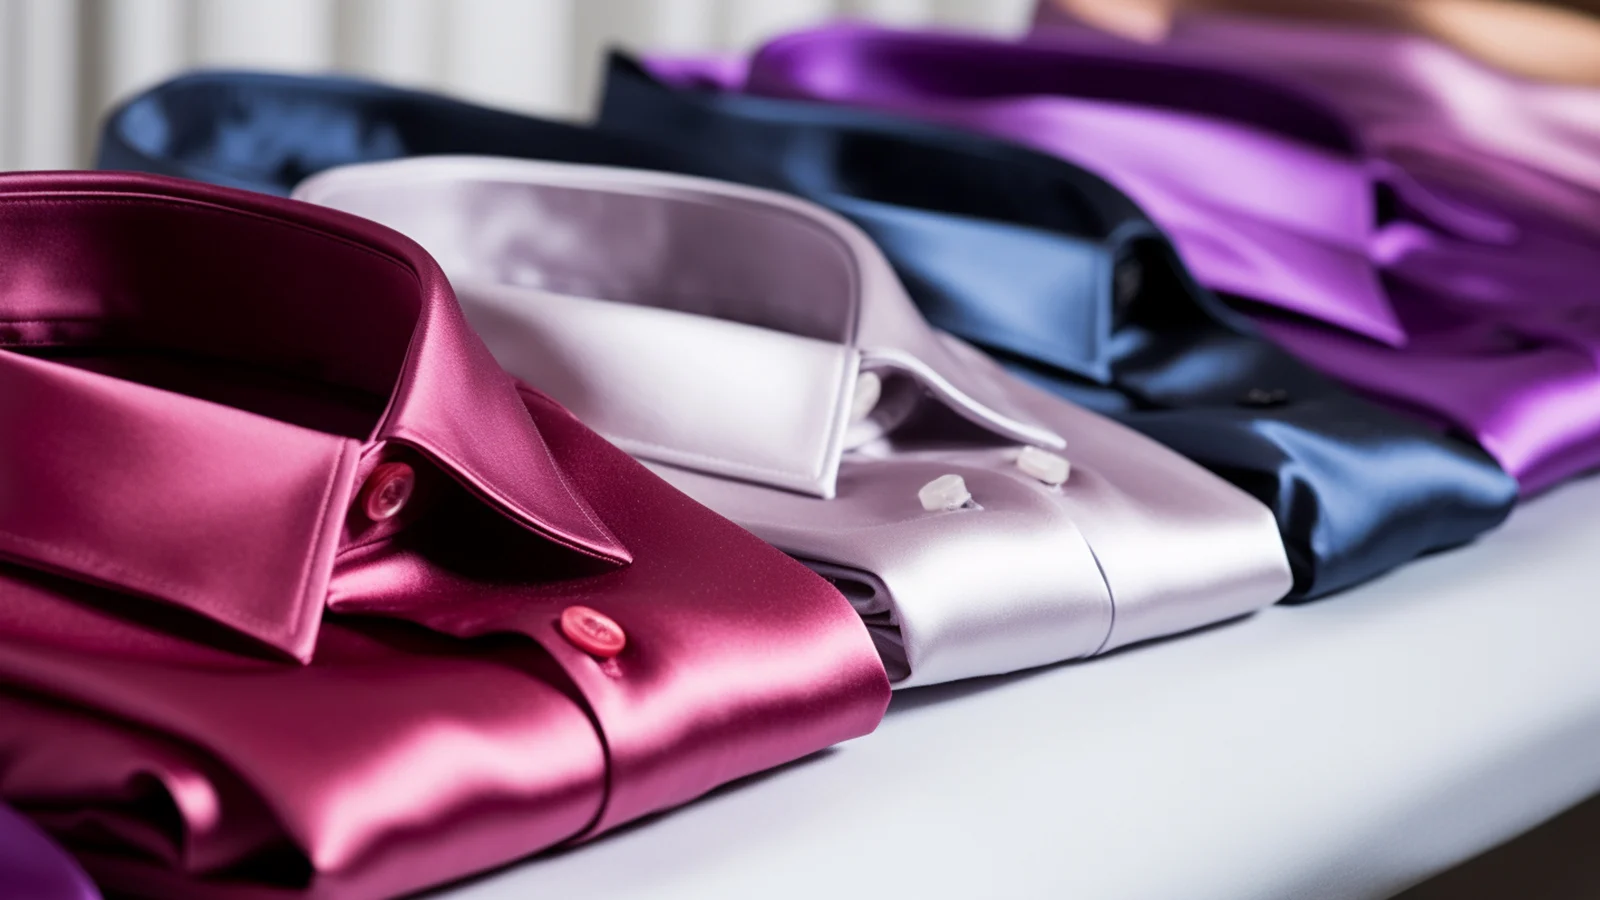 A row of different colored Satin shirts on a table.